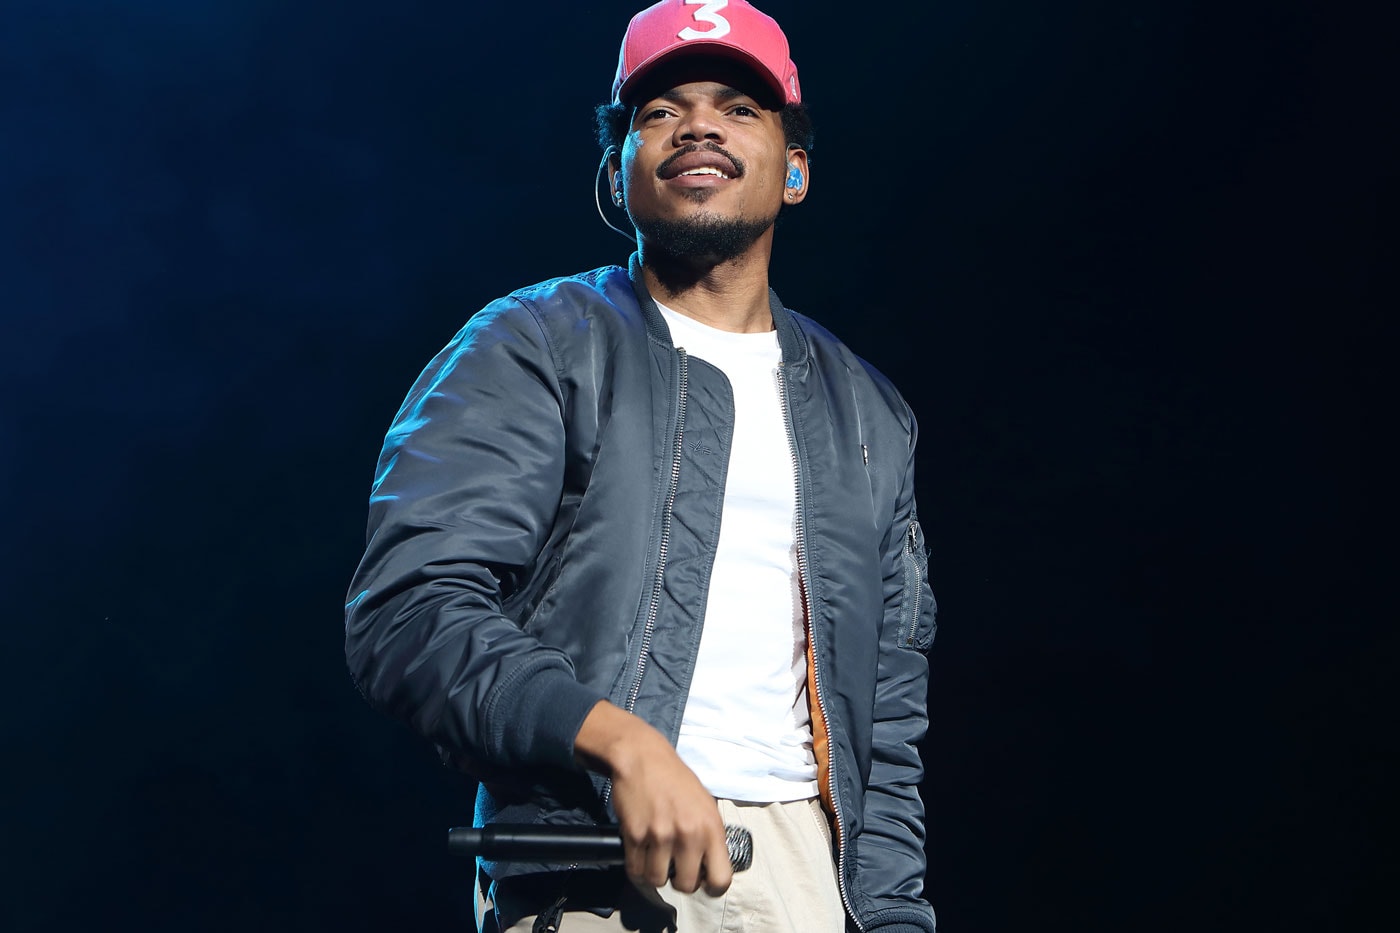 The Genesis of Chance The Rapper & Lil B's 'Free (Based Freestyle Mixtape)' Explained